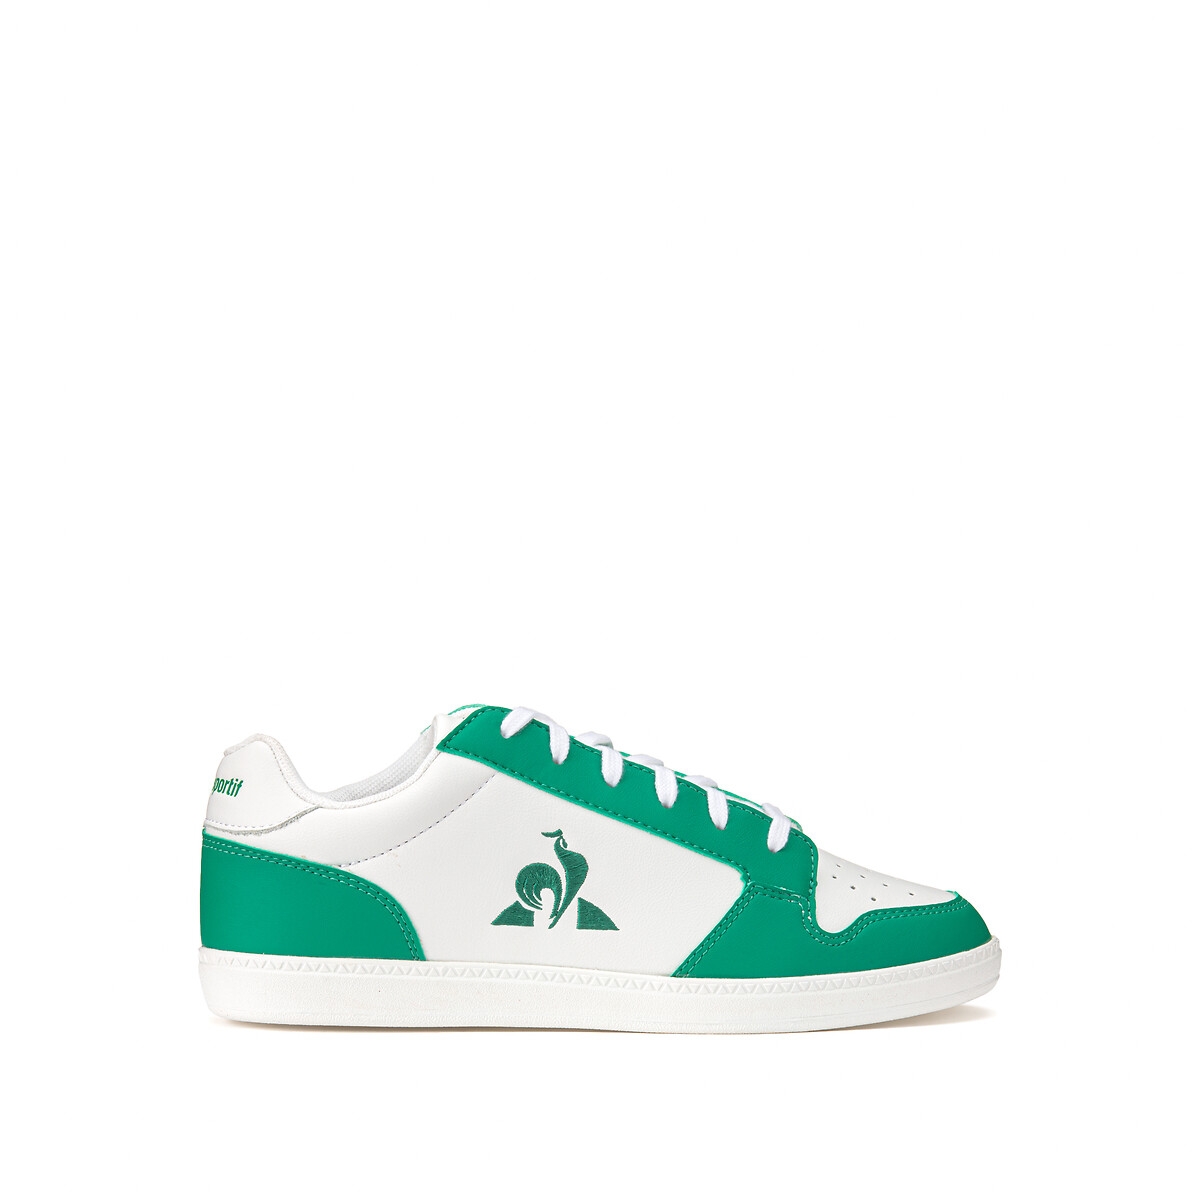 Le Coq Sportif Kids Breakpoint Leather Trainers | Rather Saucy